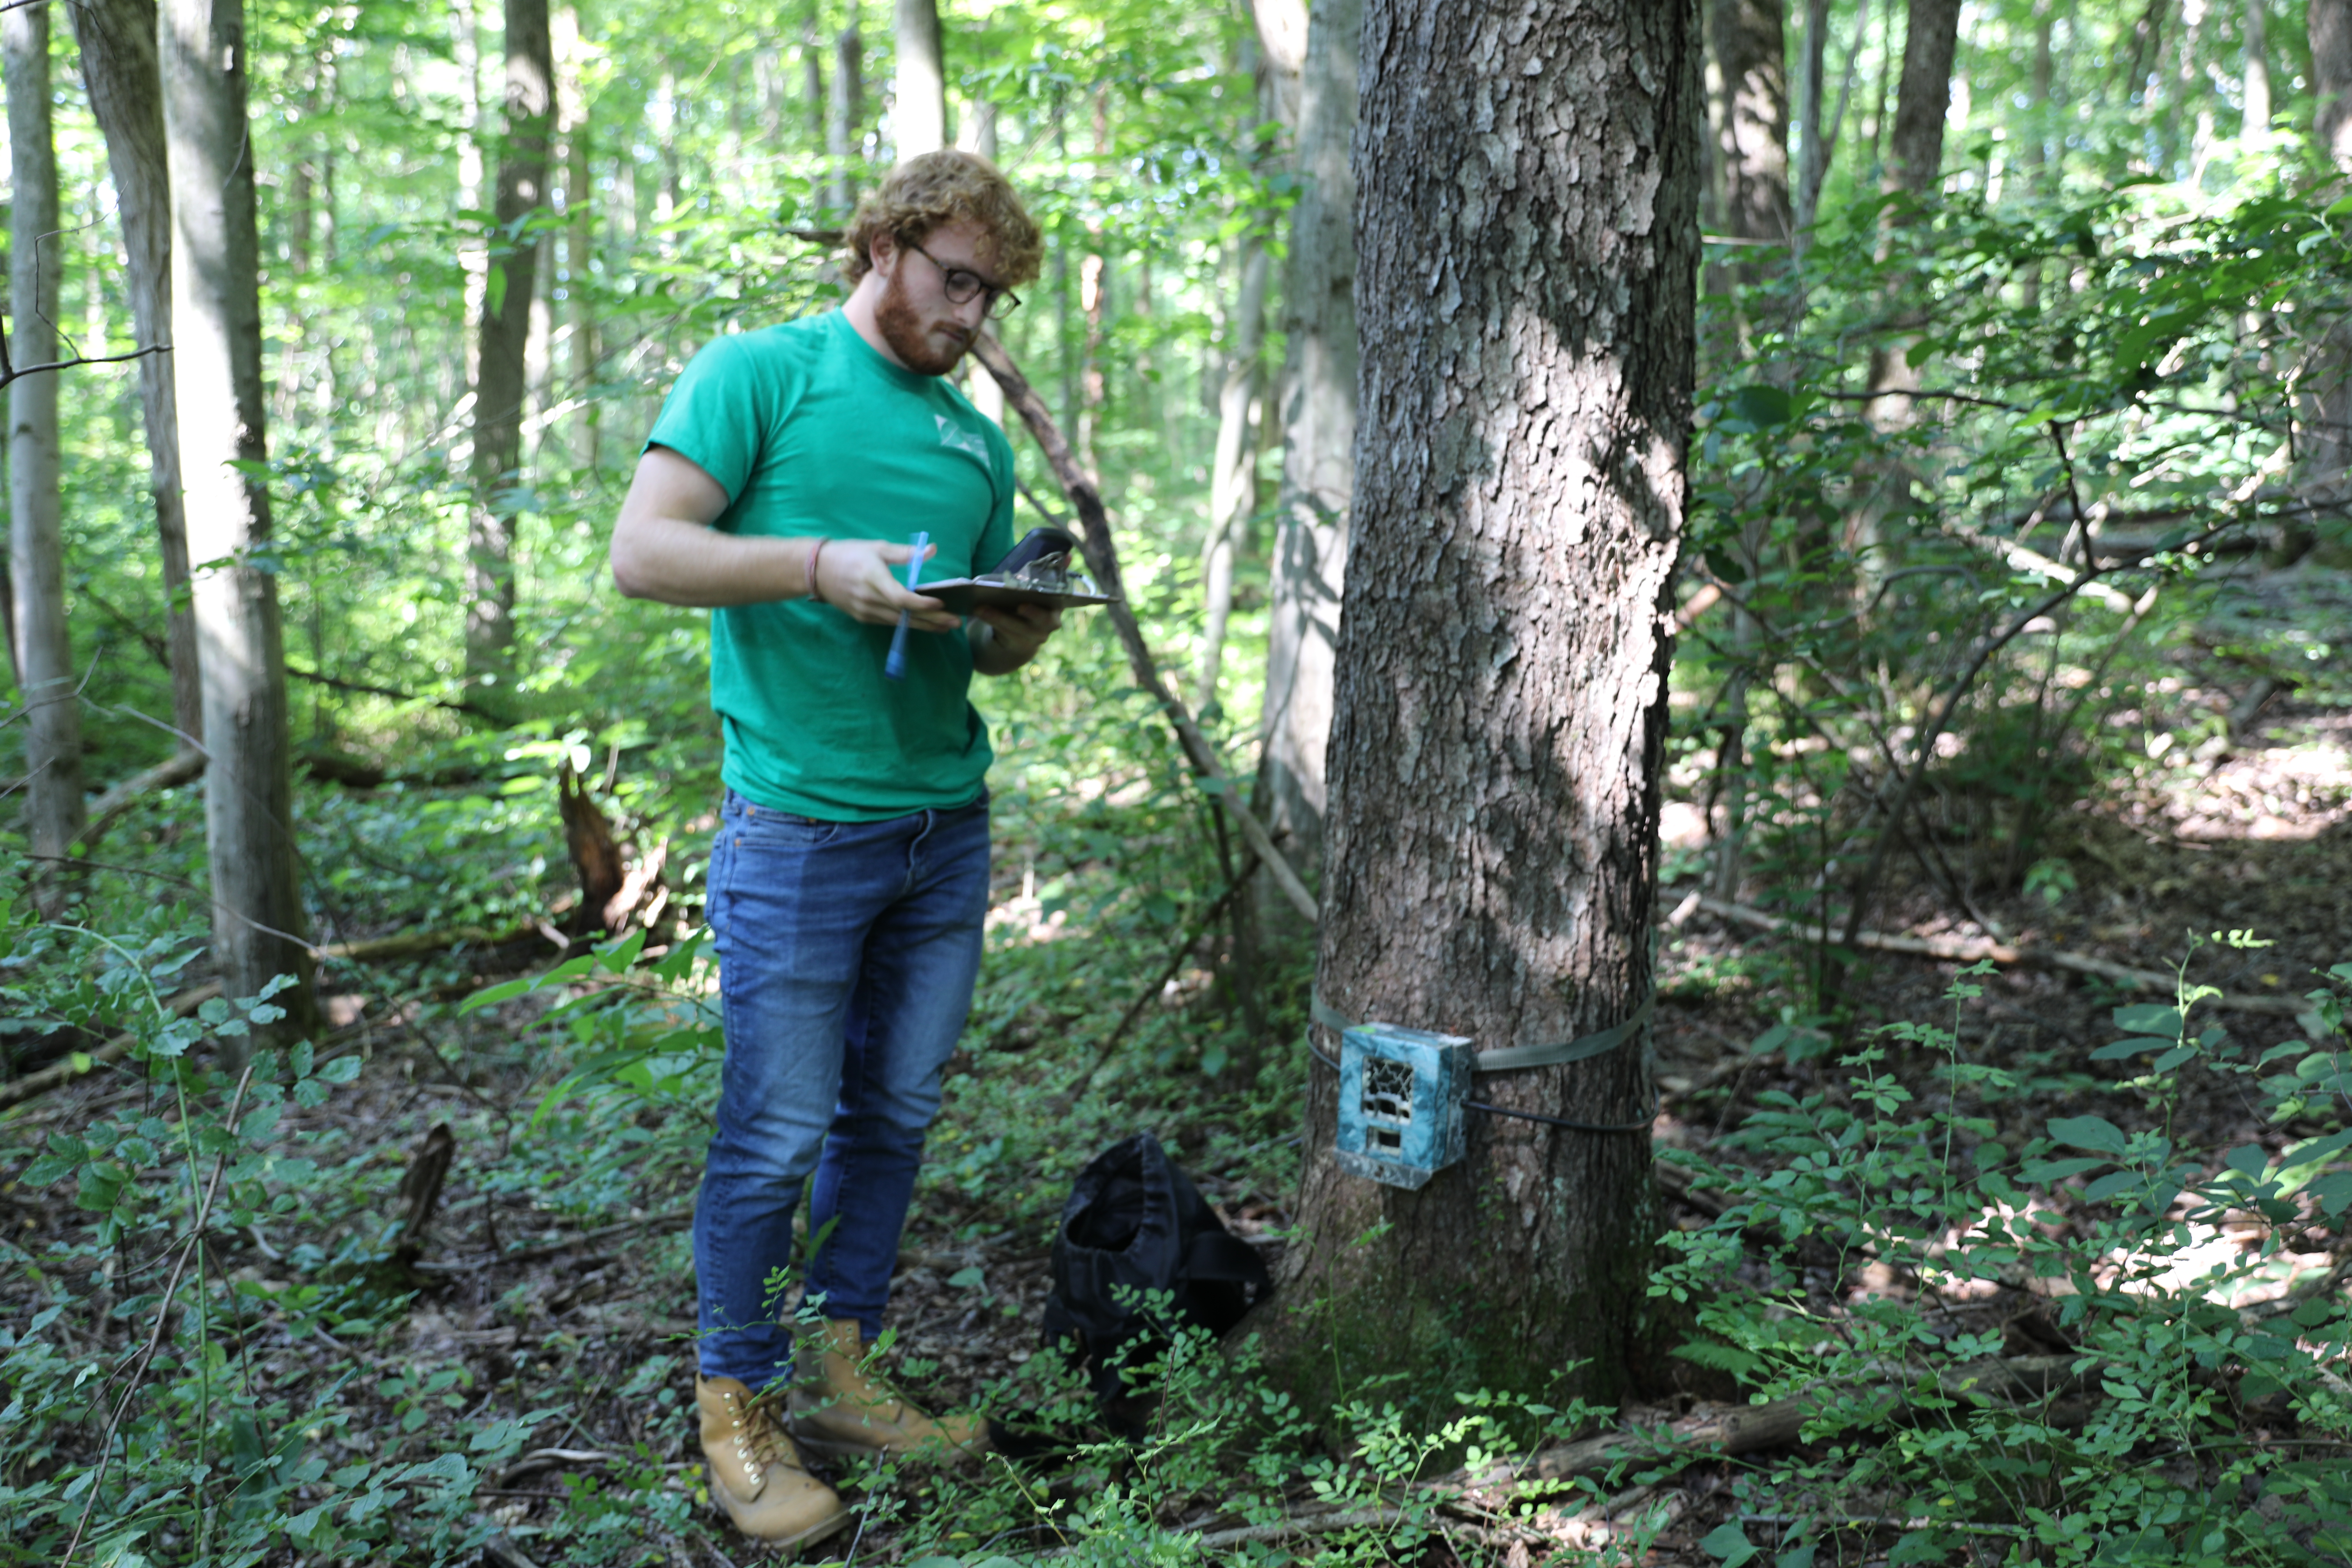 Student attaches a trails camera to a tree at the Nature Center